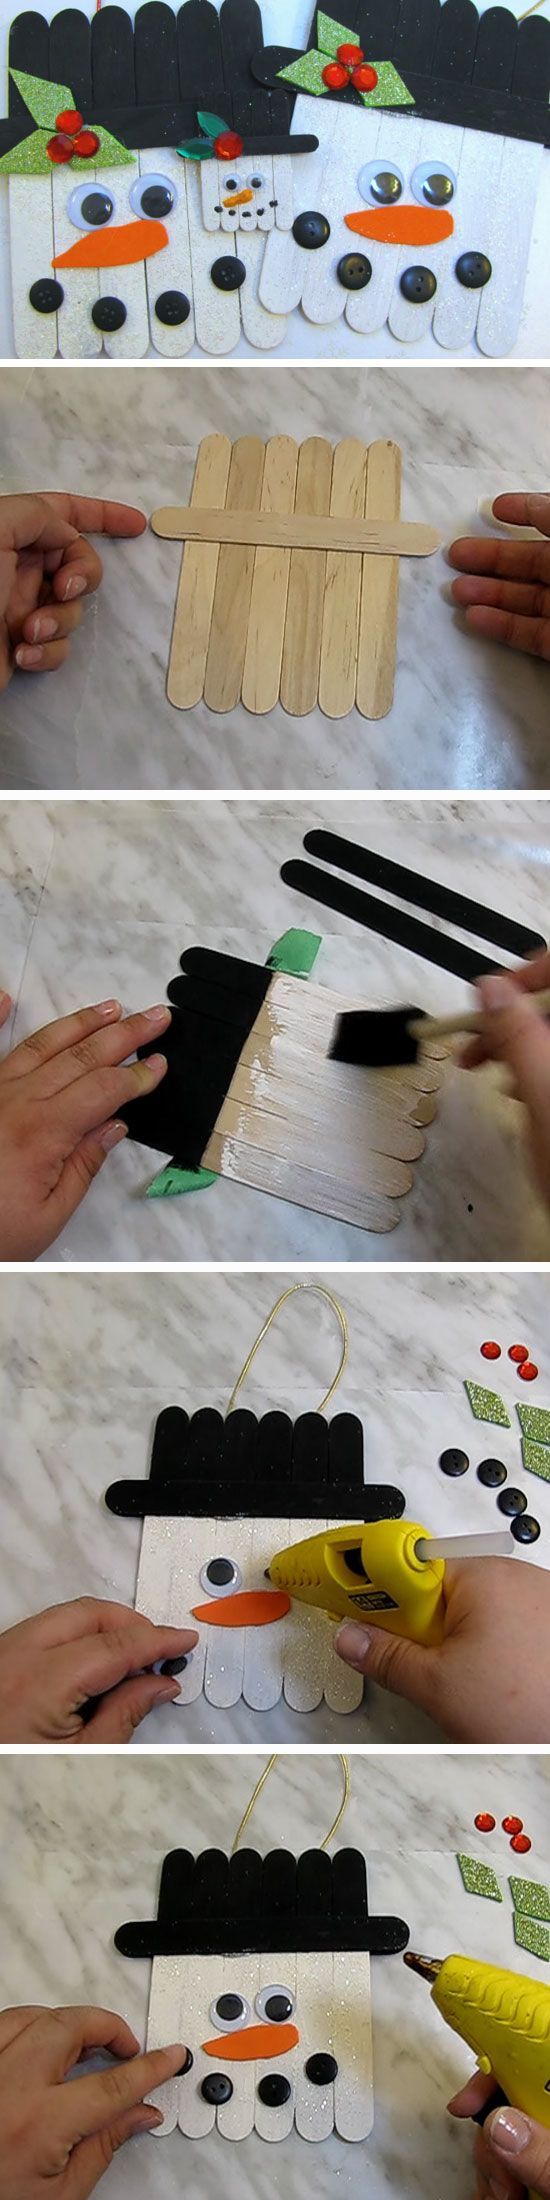 Popsicle Stick Snowman | 20+ DIY Christmas Crafts for Kids to Make